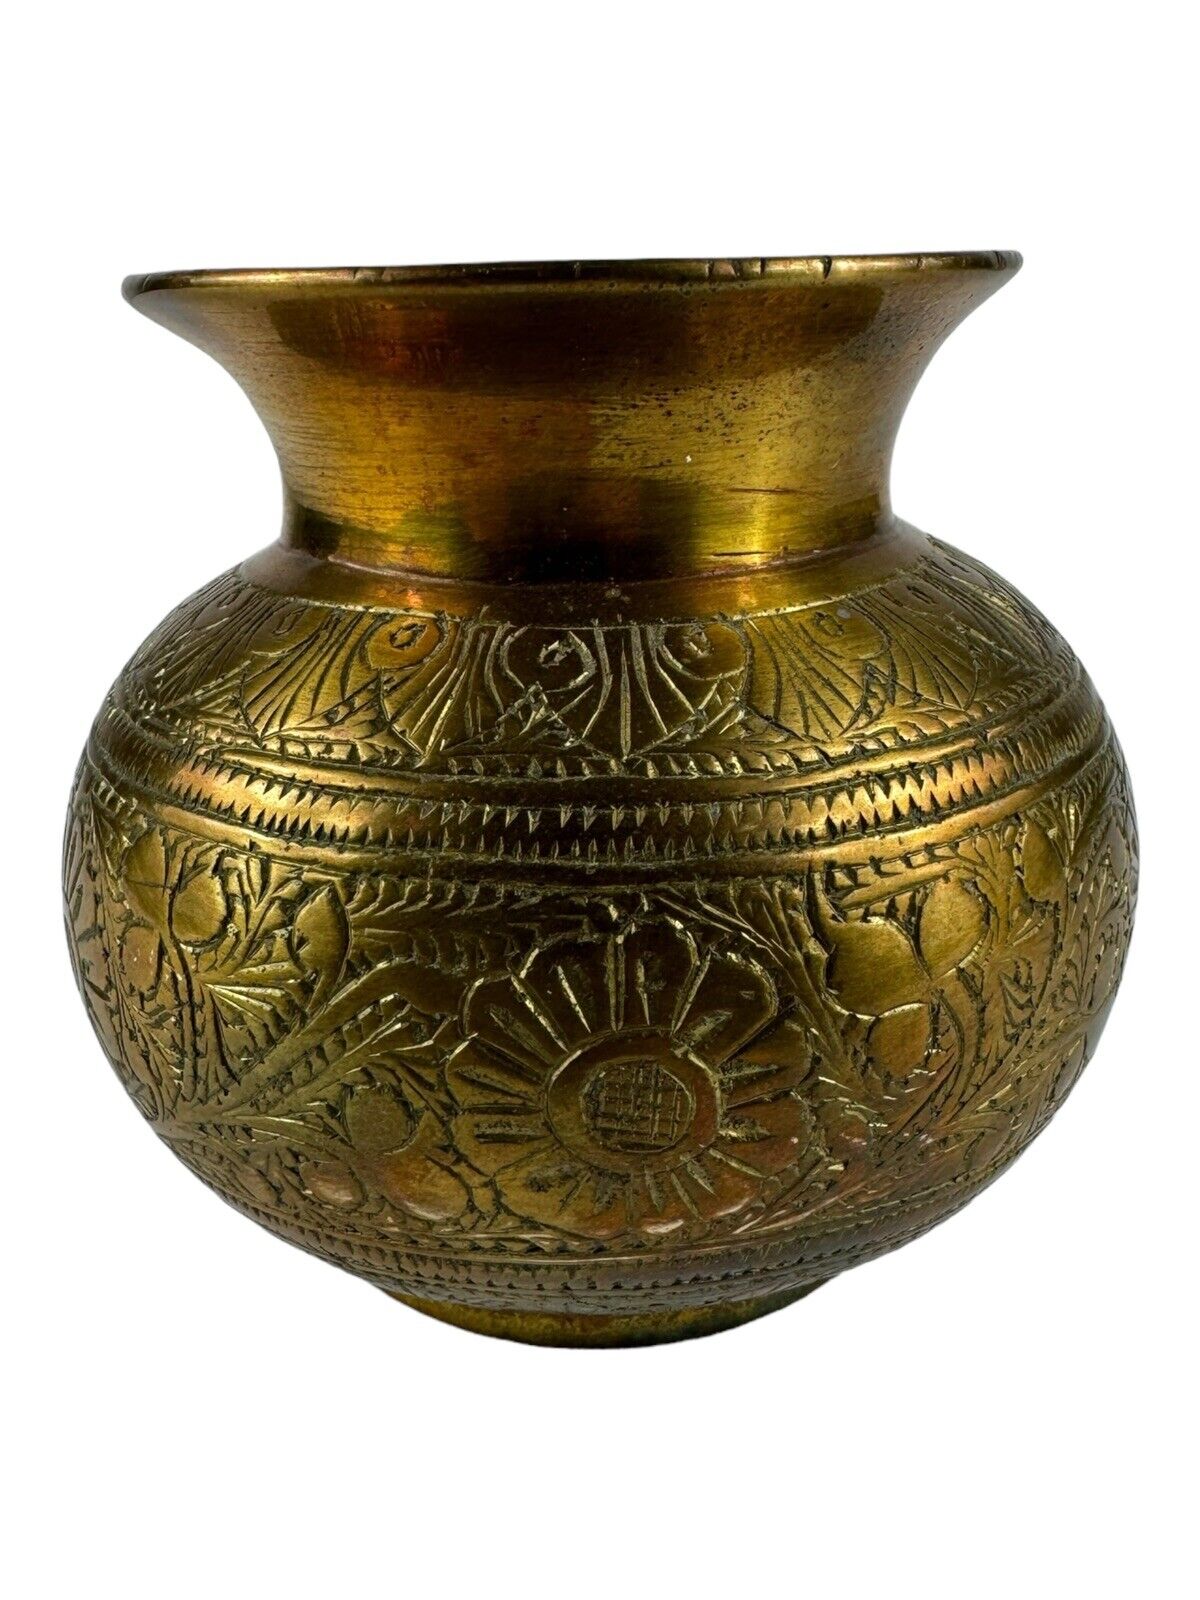 VINTAGE ANTIQUE BRASS BRONZE ETCHED HOLY WATER HINDU TEMPLE SMALL VASE